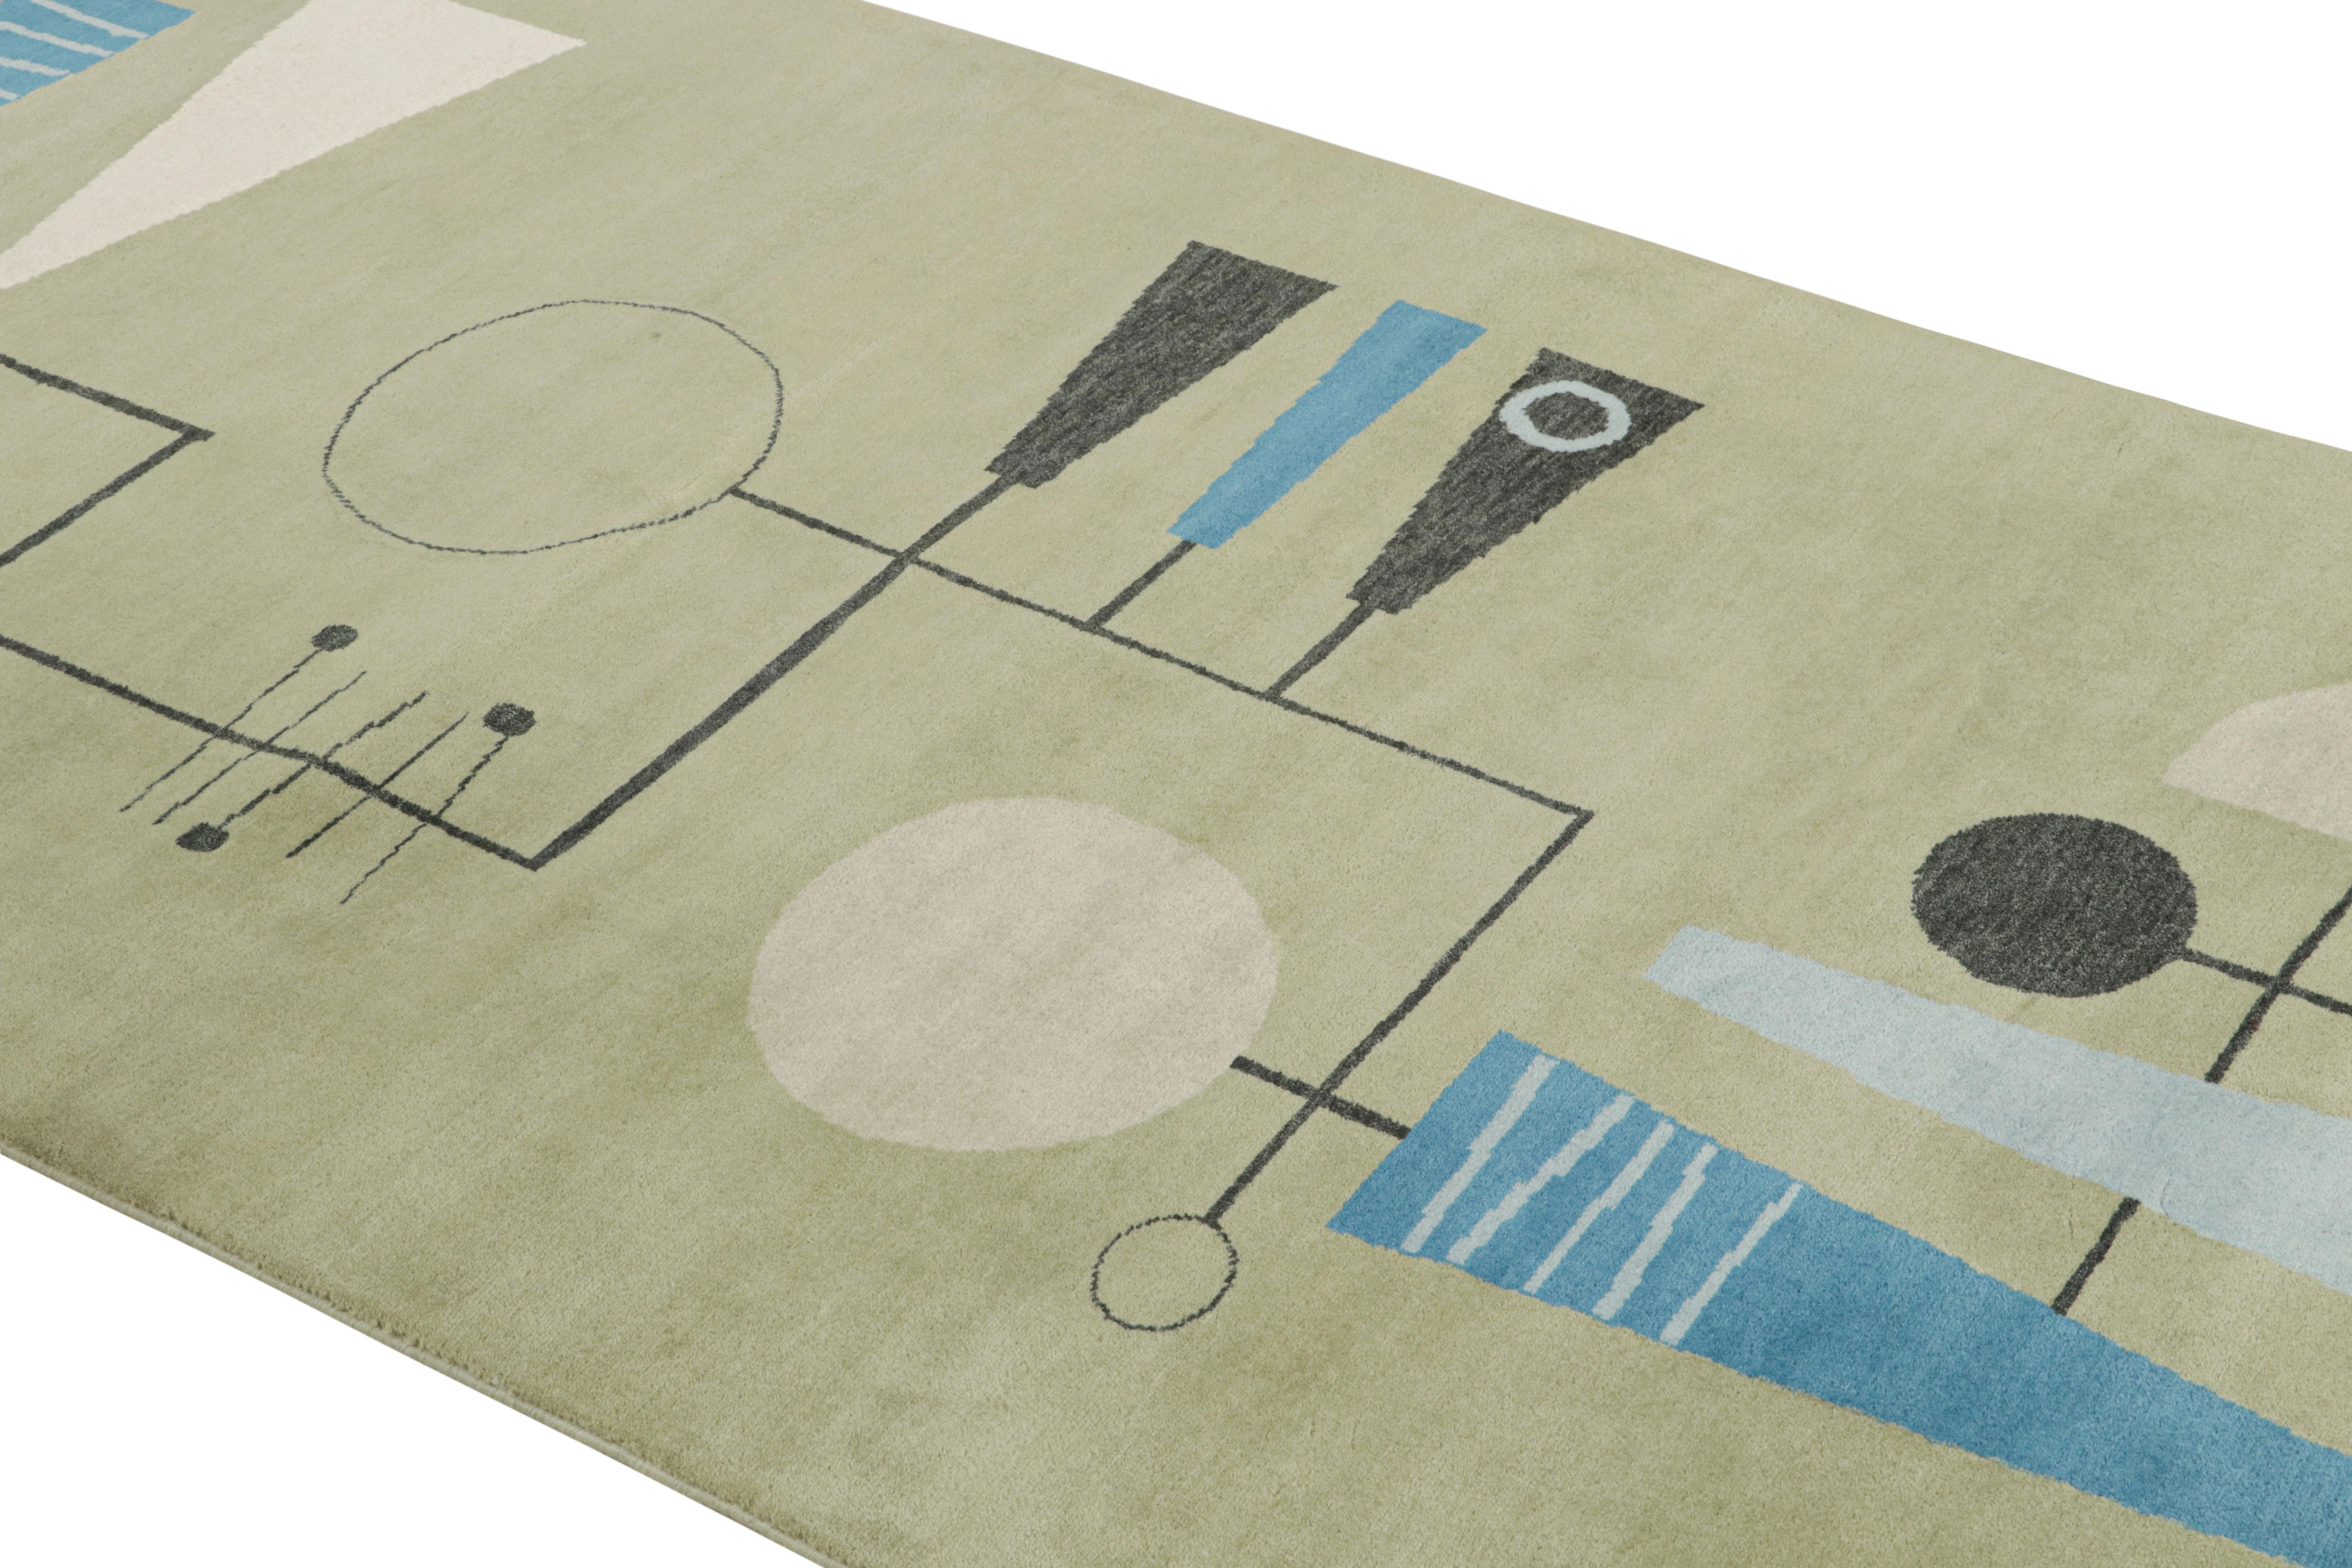 A 4x12 rug from the Mid-Century Modern Collection by Rug & Kilim—a bold reimagining of 1950s styes unseen in luxury hand-knotted rugs before. In collaboration with modern artist El Gato Gomez, this particular near-runner piece enjoys a retro